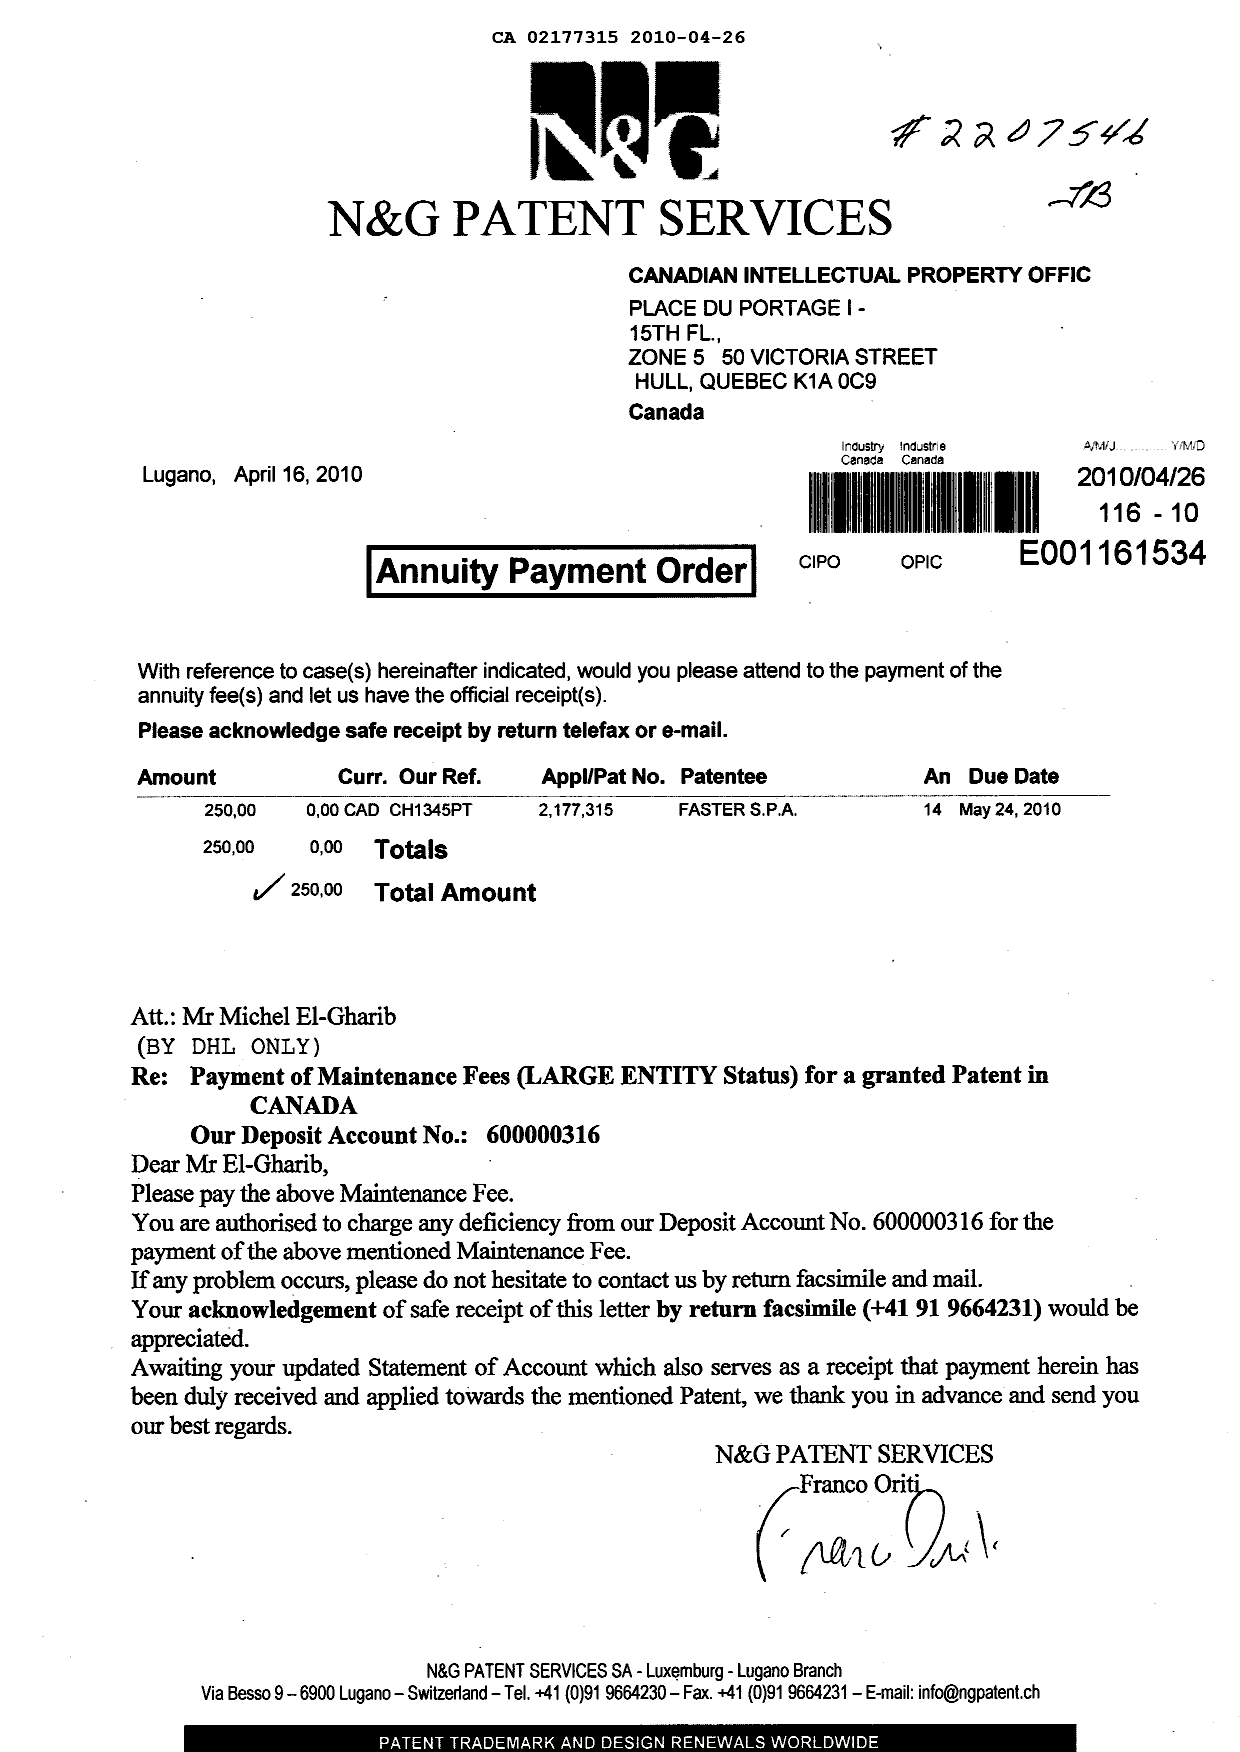 Canadian Patent Document 2177315. Fees 20100426. Image 1 of 1